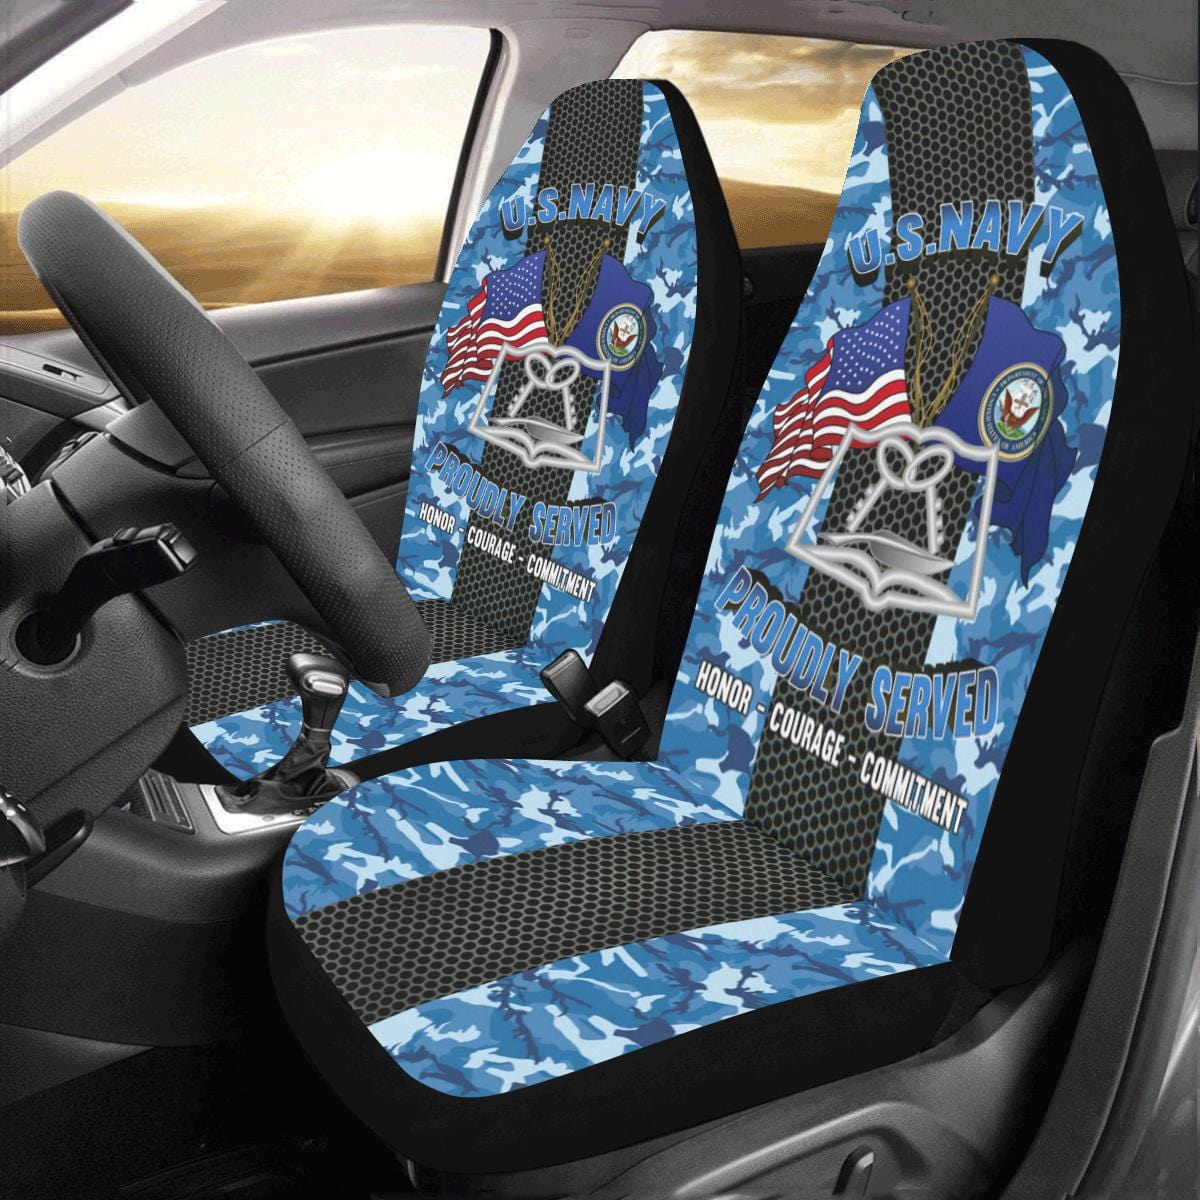 Navy Culinary Specialist Navy CS Car Seat Covers (Set of 2)-SeatCovers-Navy-Rate-Veterans Nation